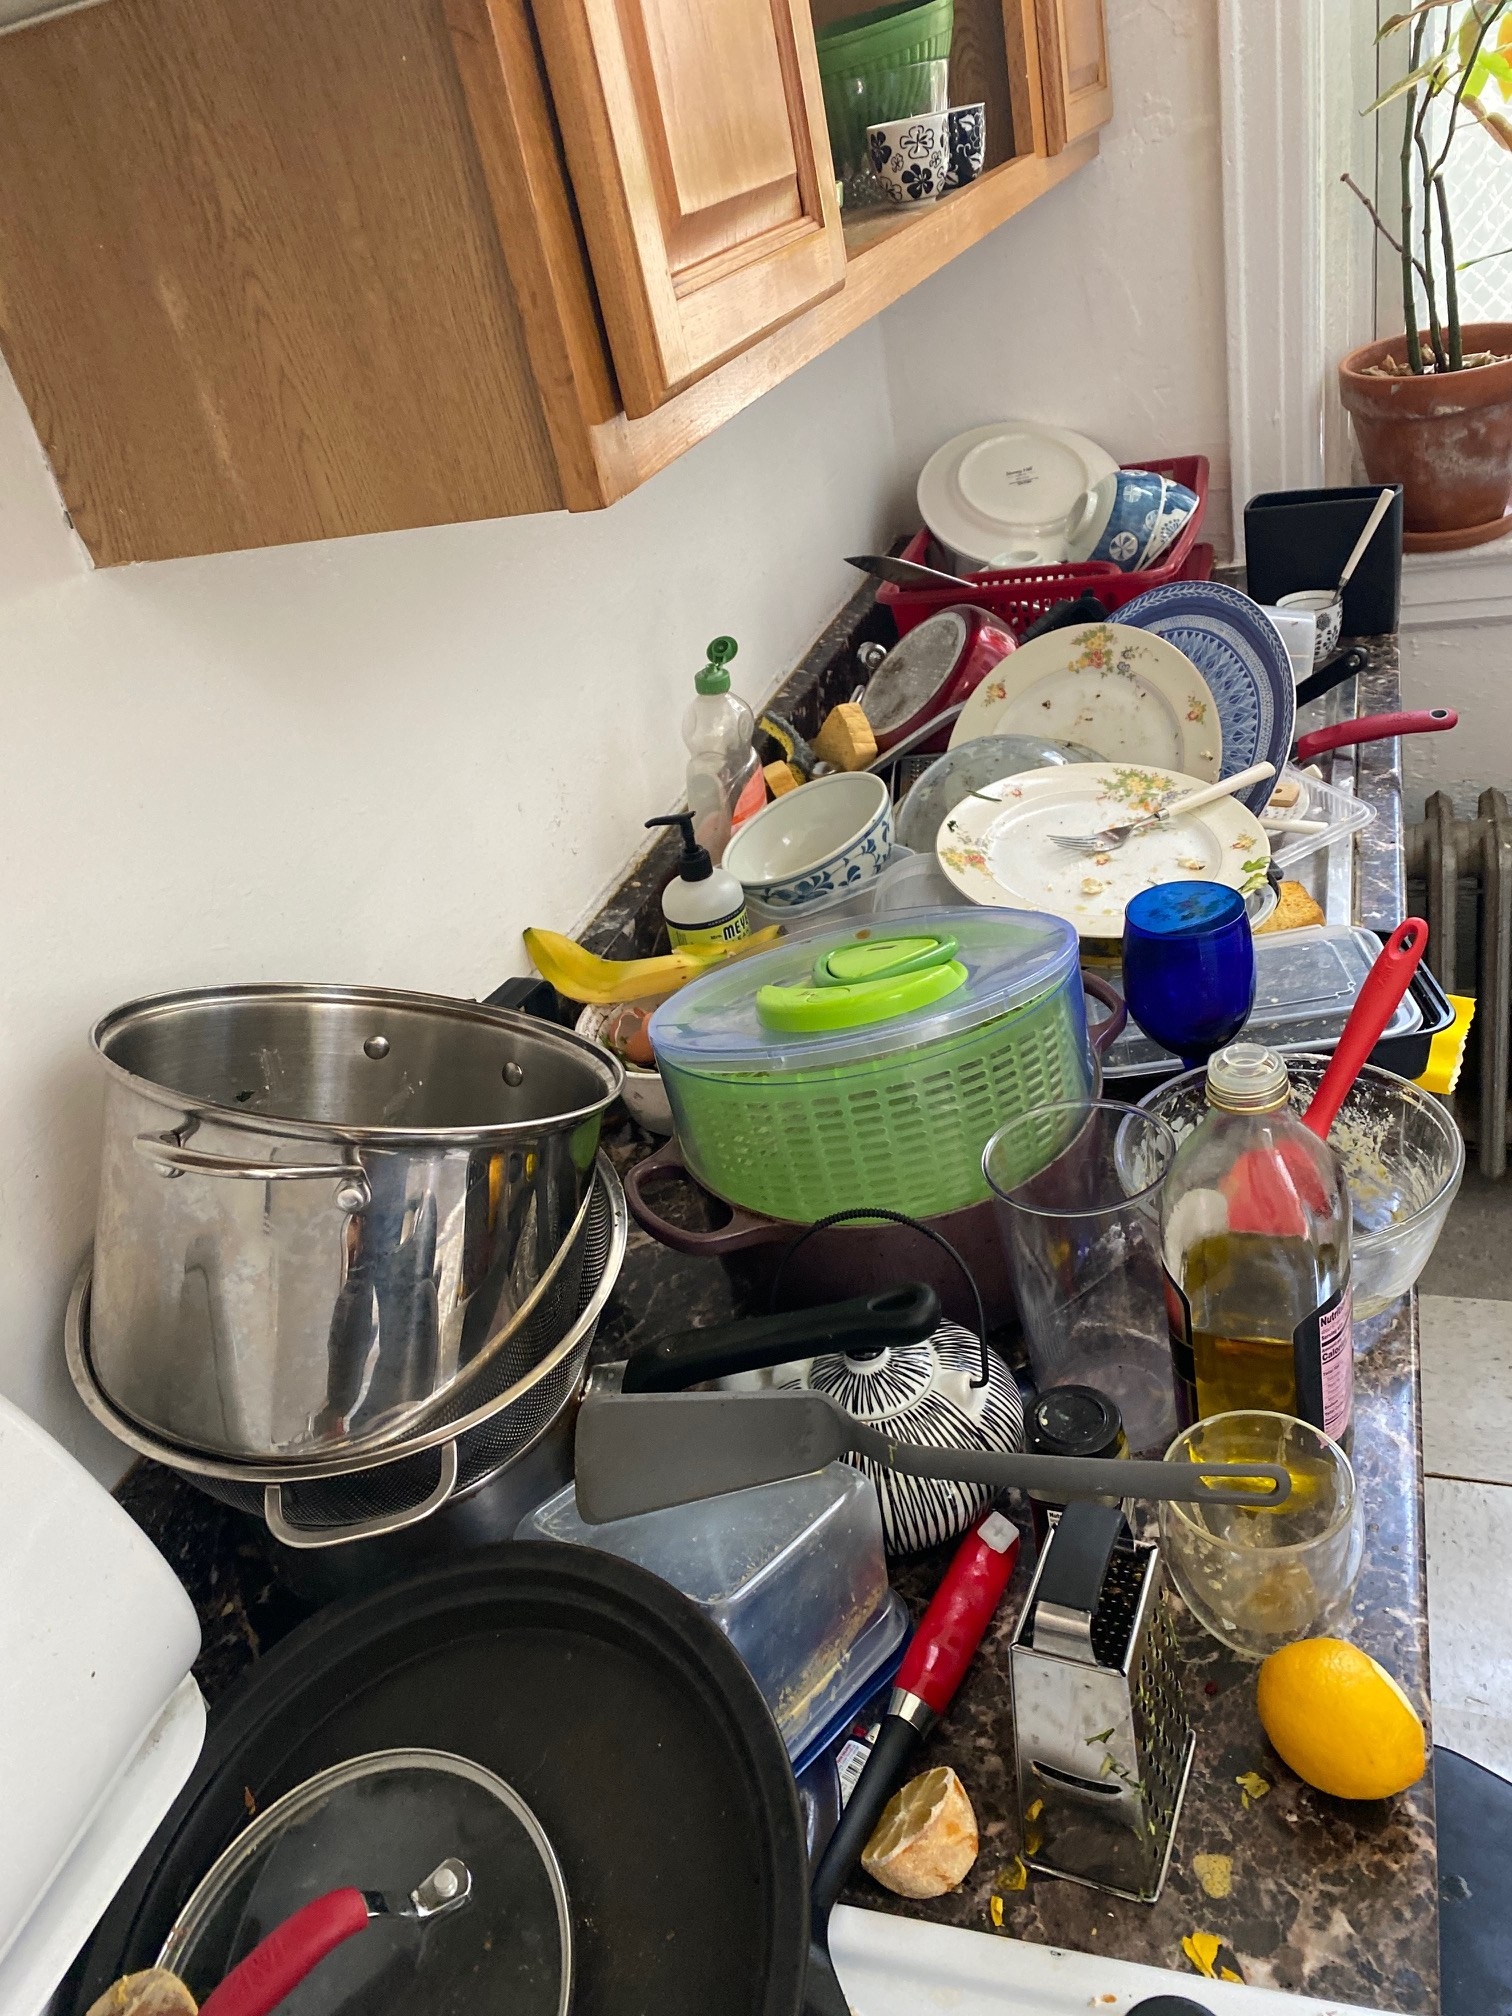 A massive amount of dirty dishes are strewn across a countertop